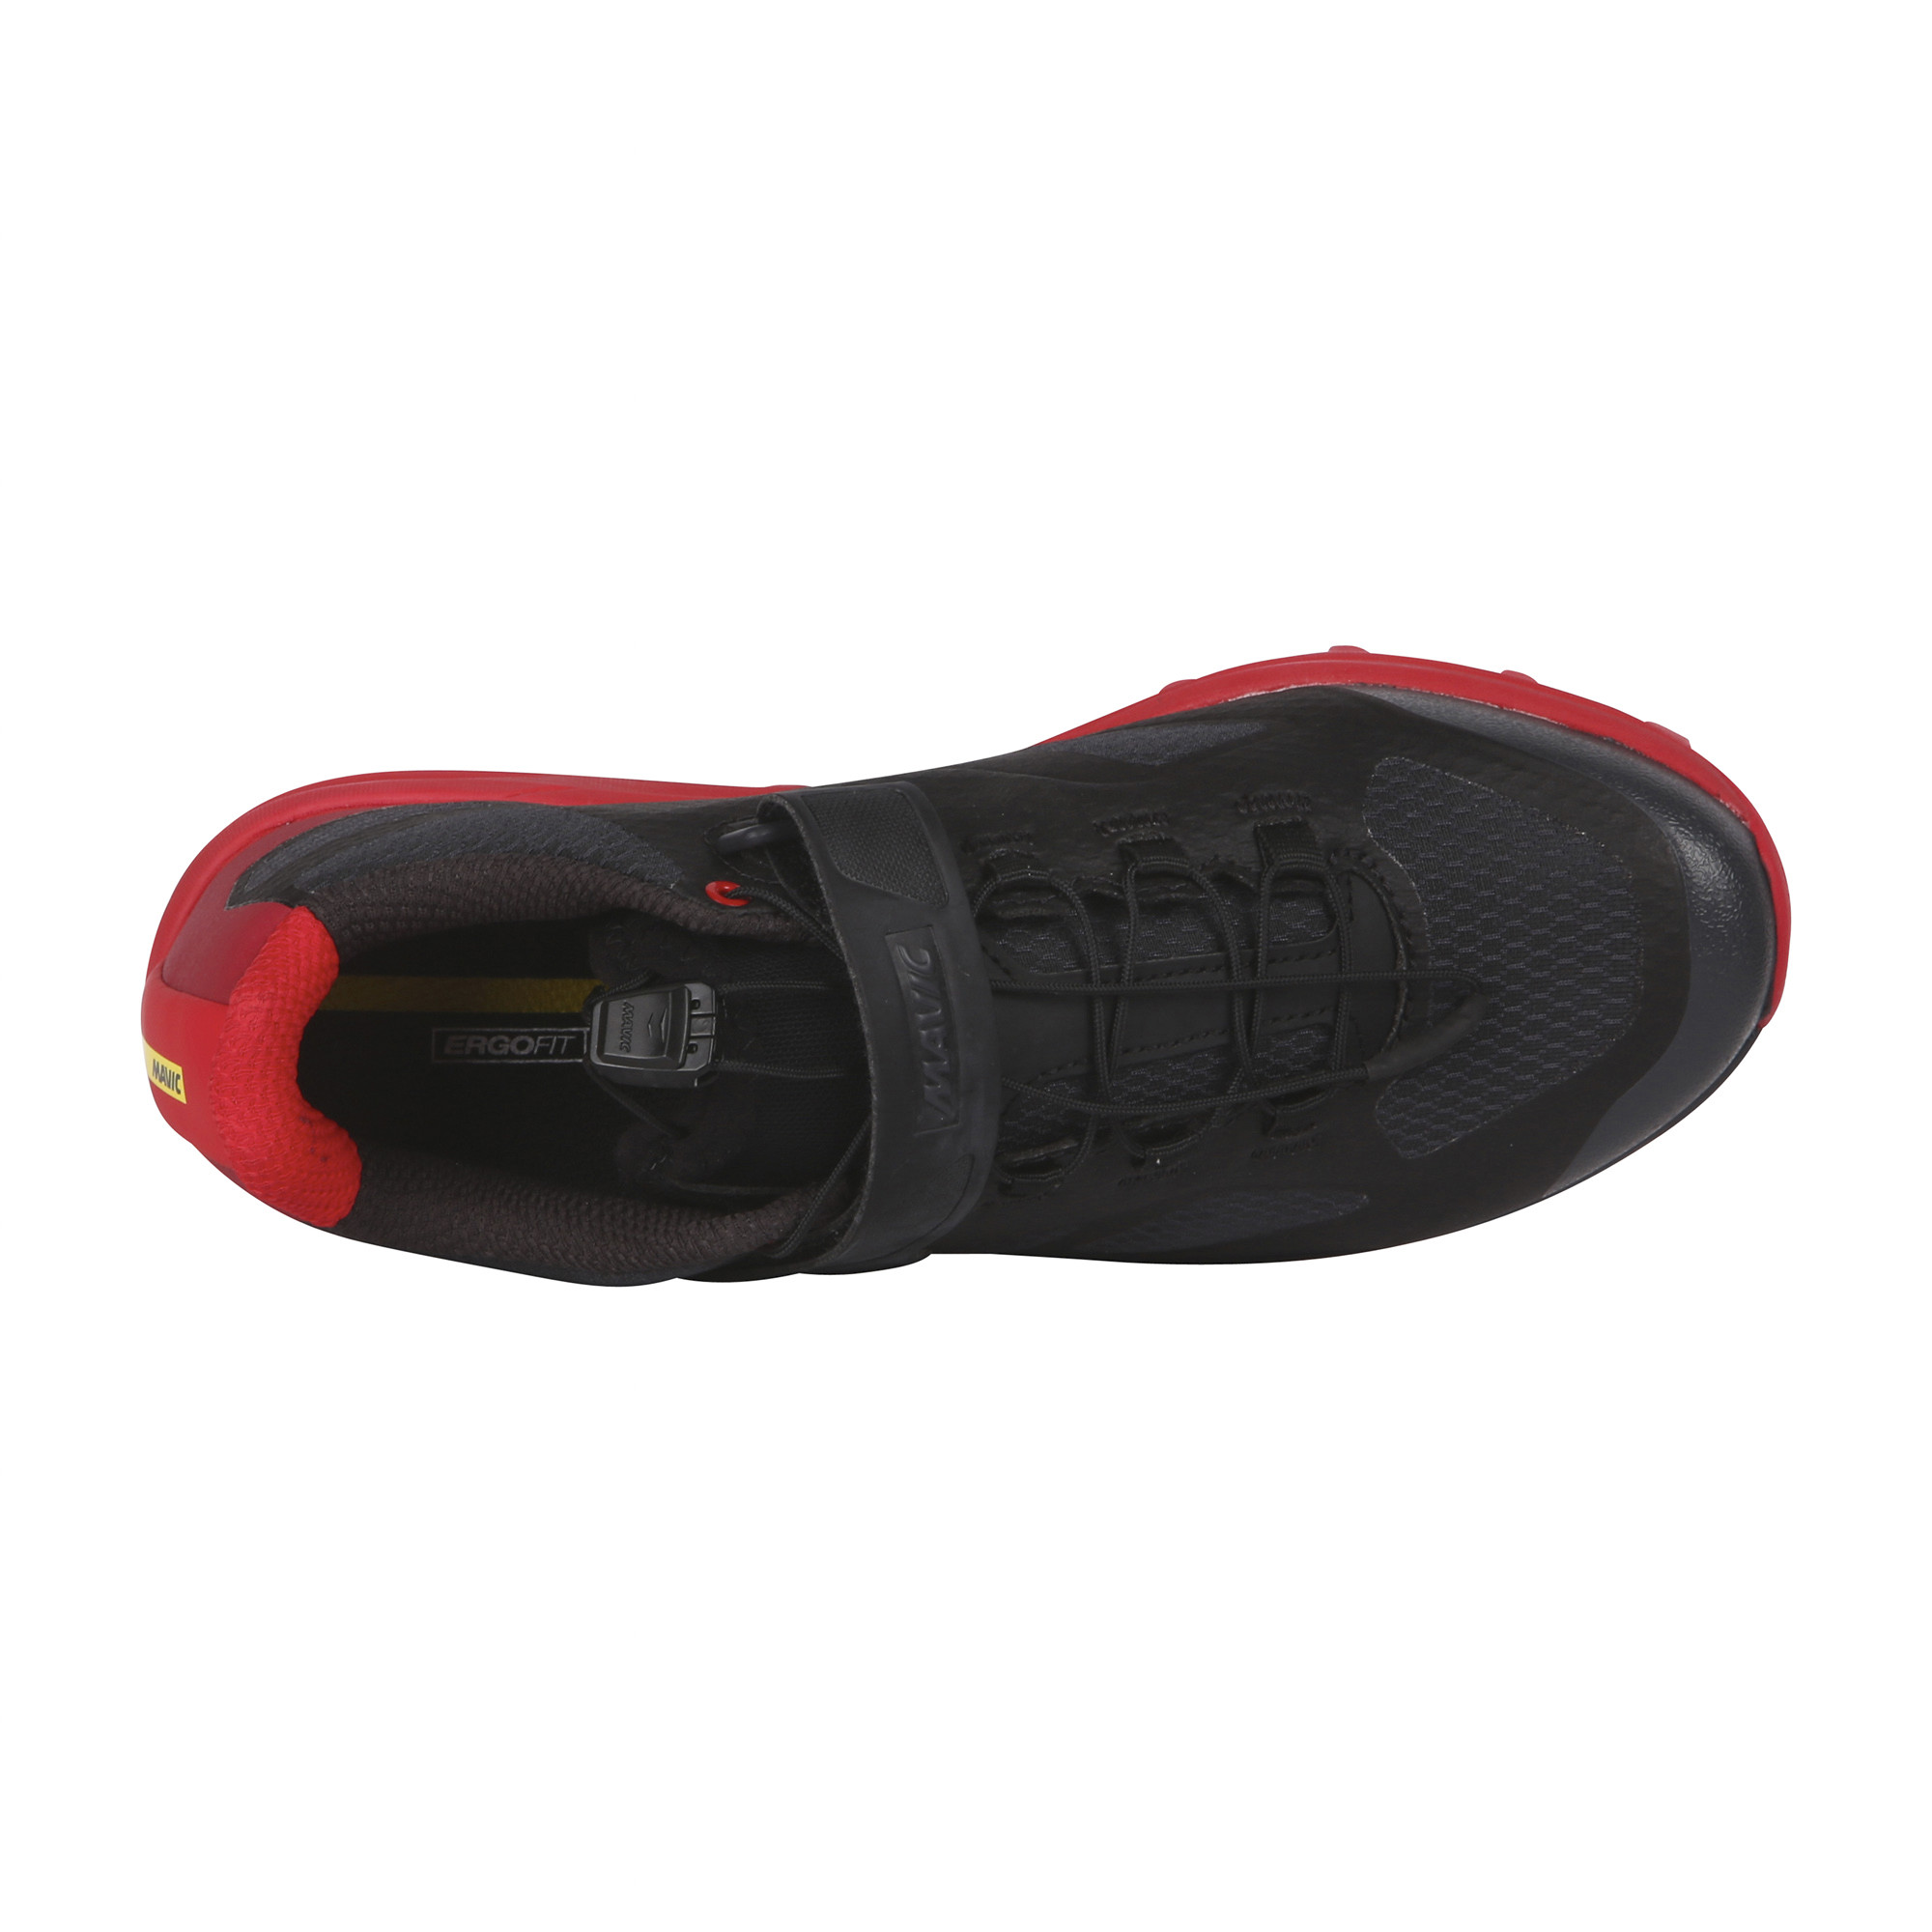 Unisex cycling shoes